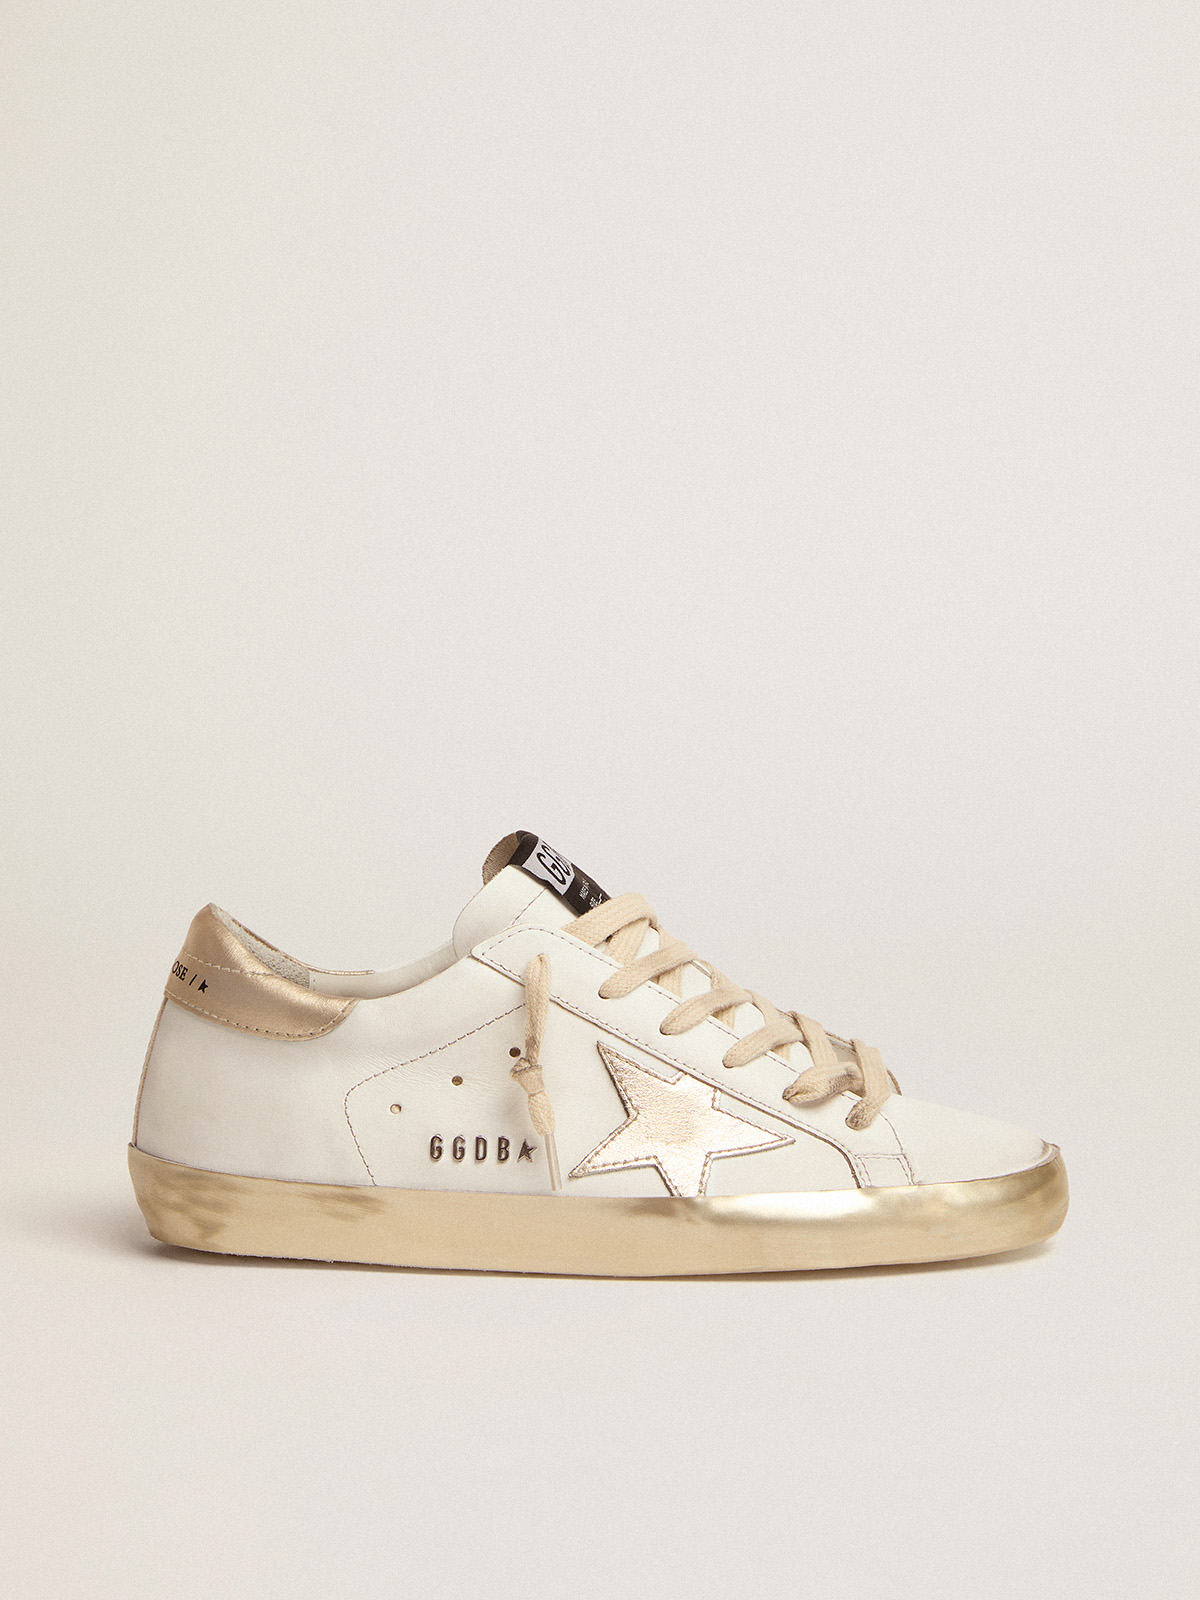 Women's Super-Star sneakers with gold foxing | Golden Goose